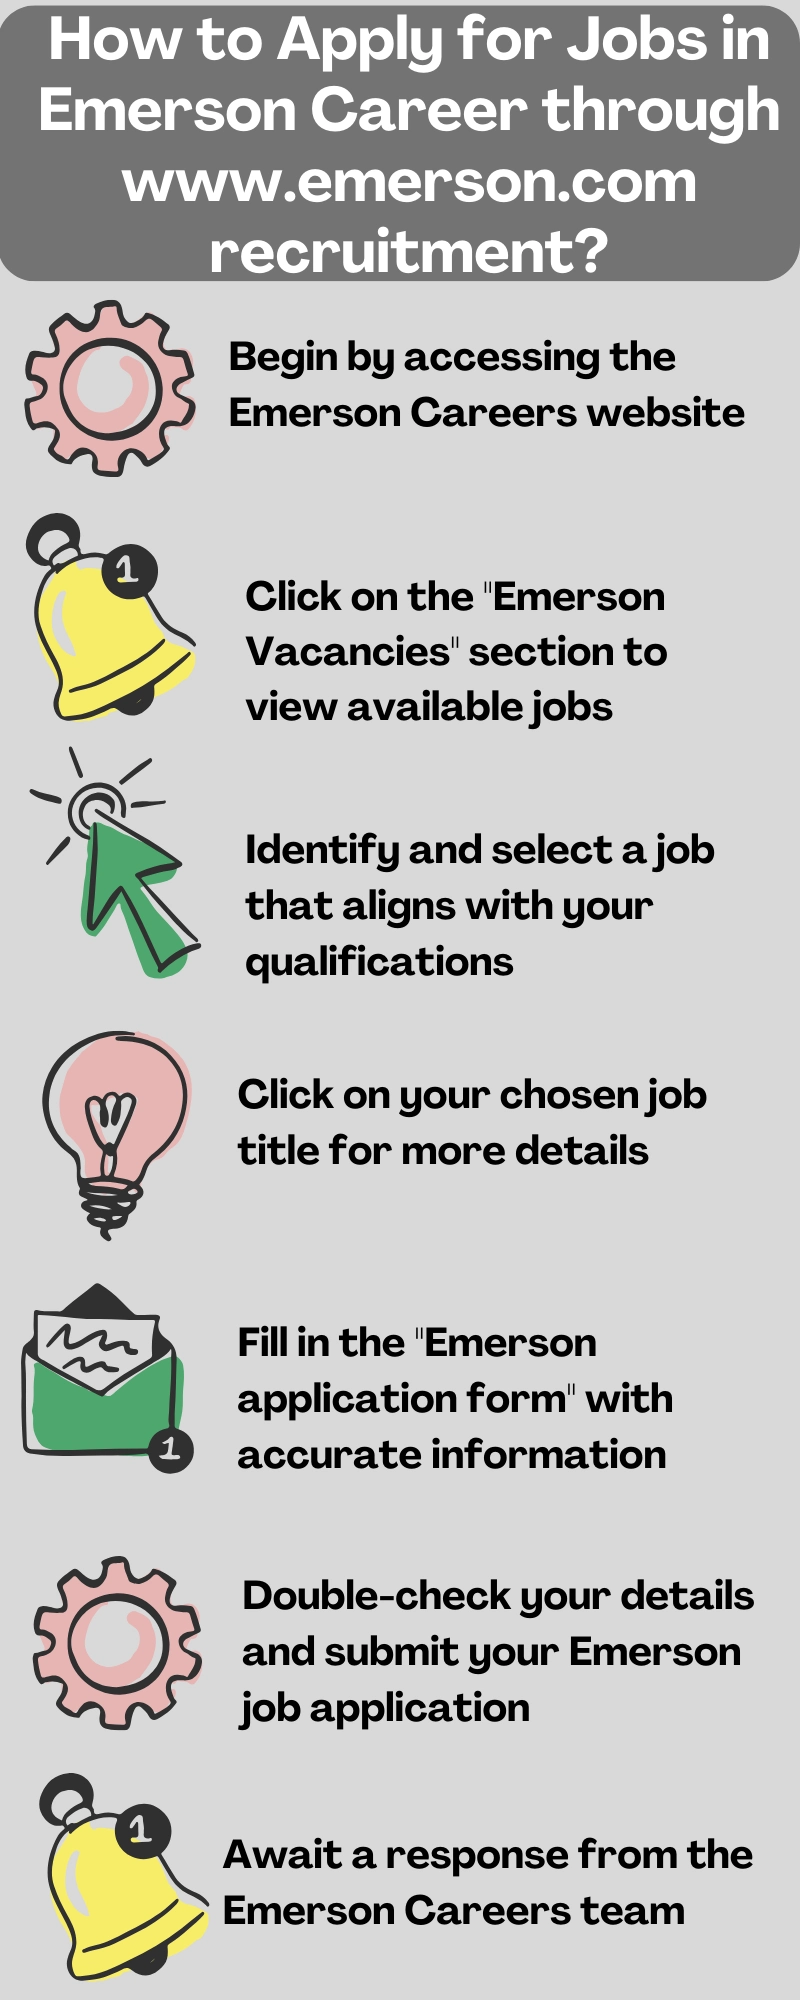 How to Apply for Jobs in Emerson Career through www.emerson.com recruitment?